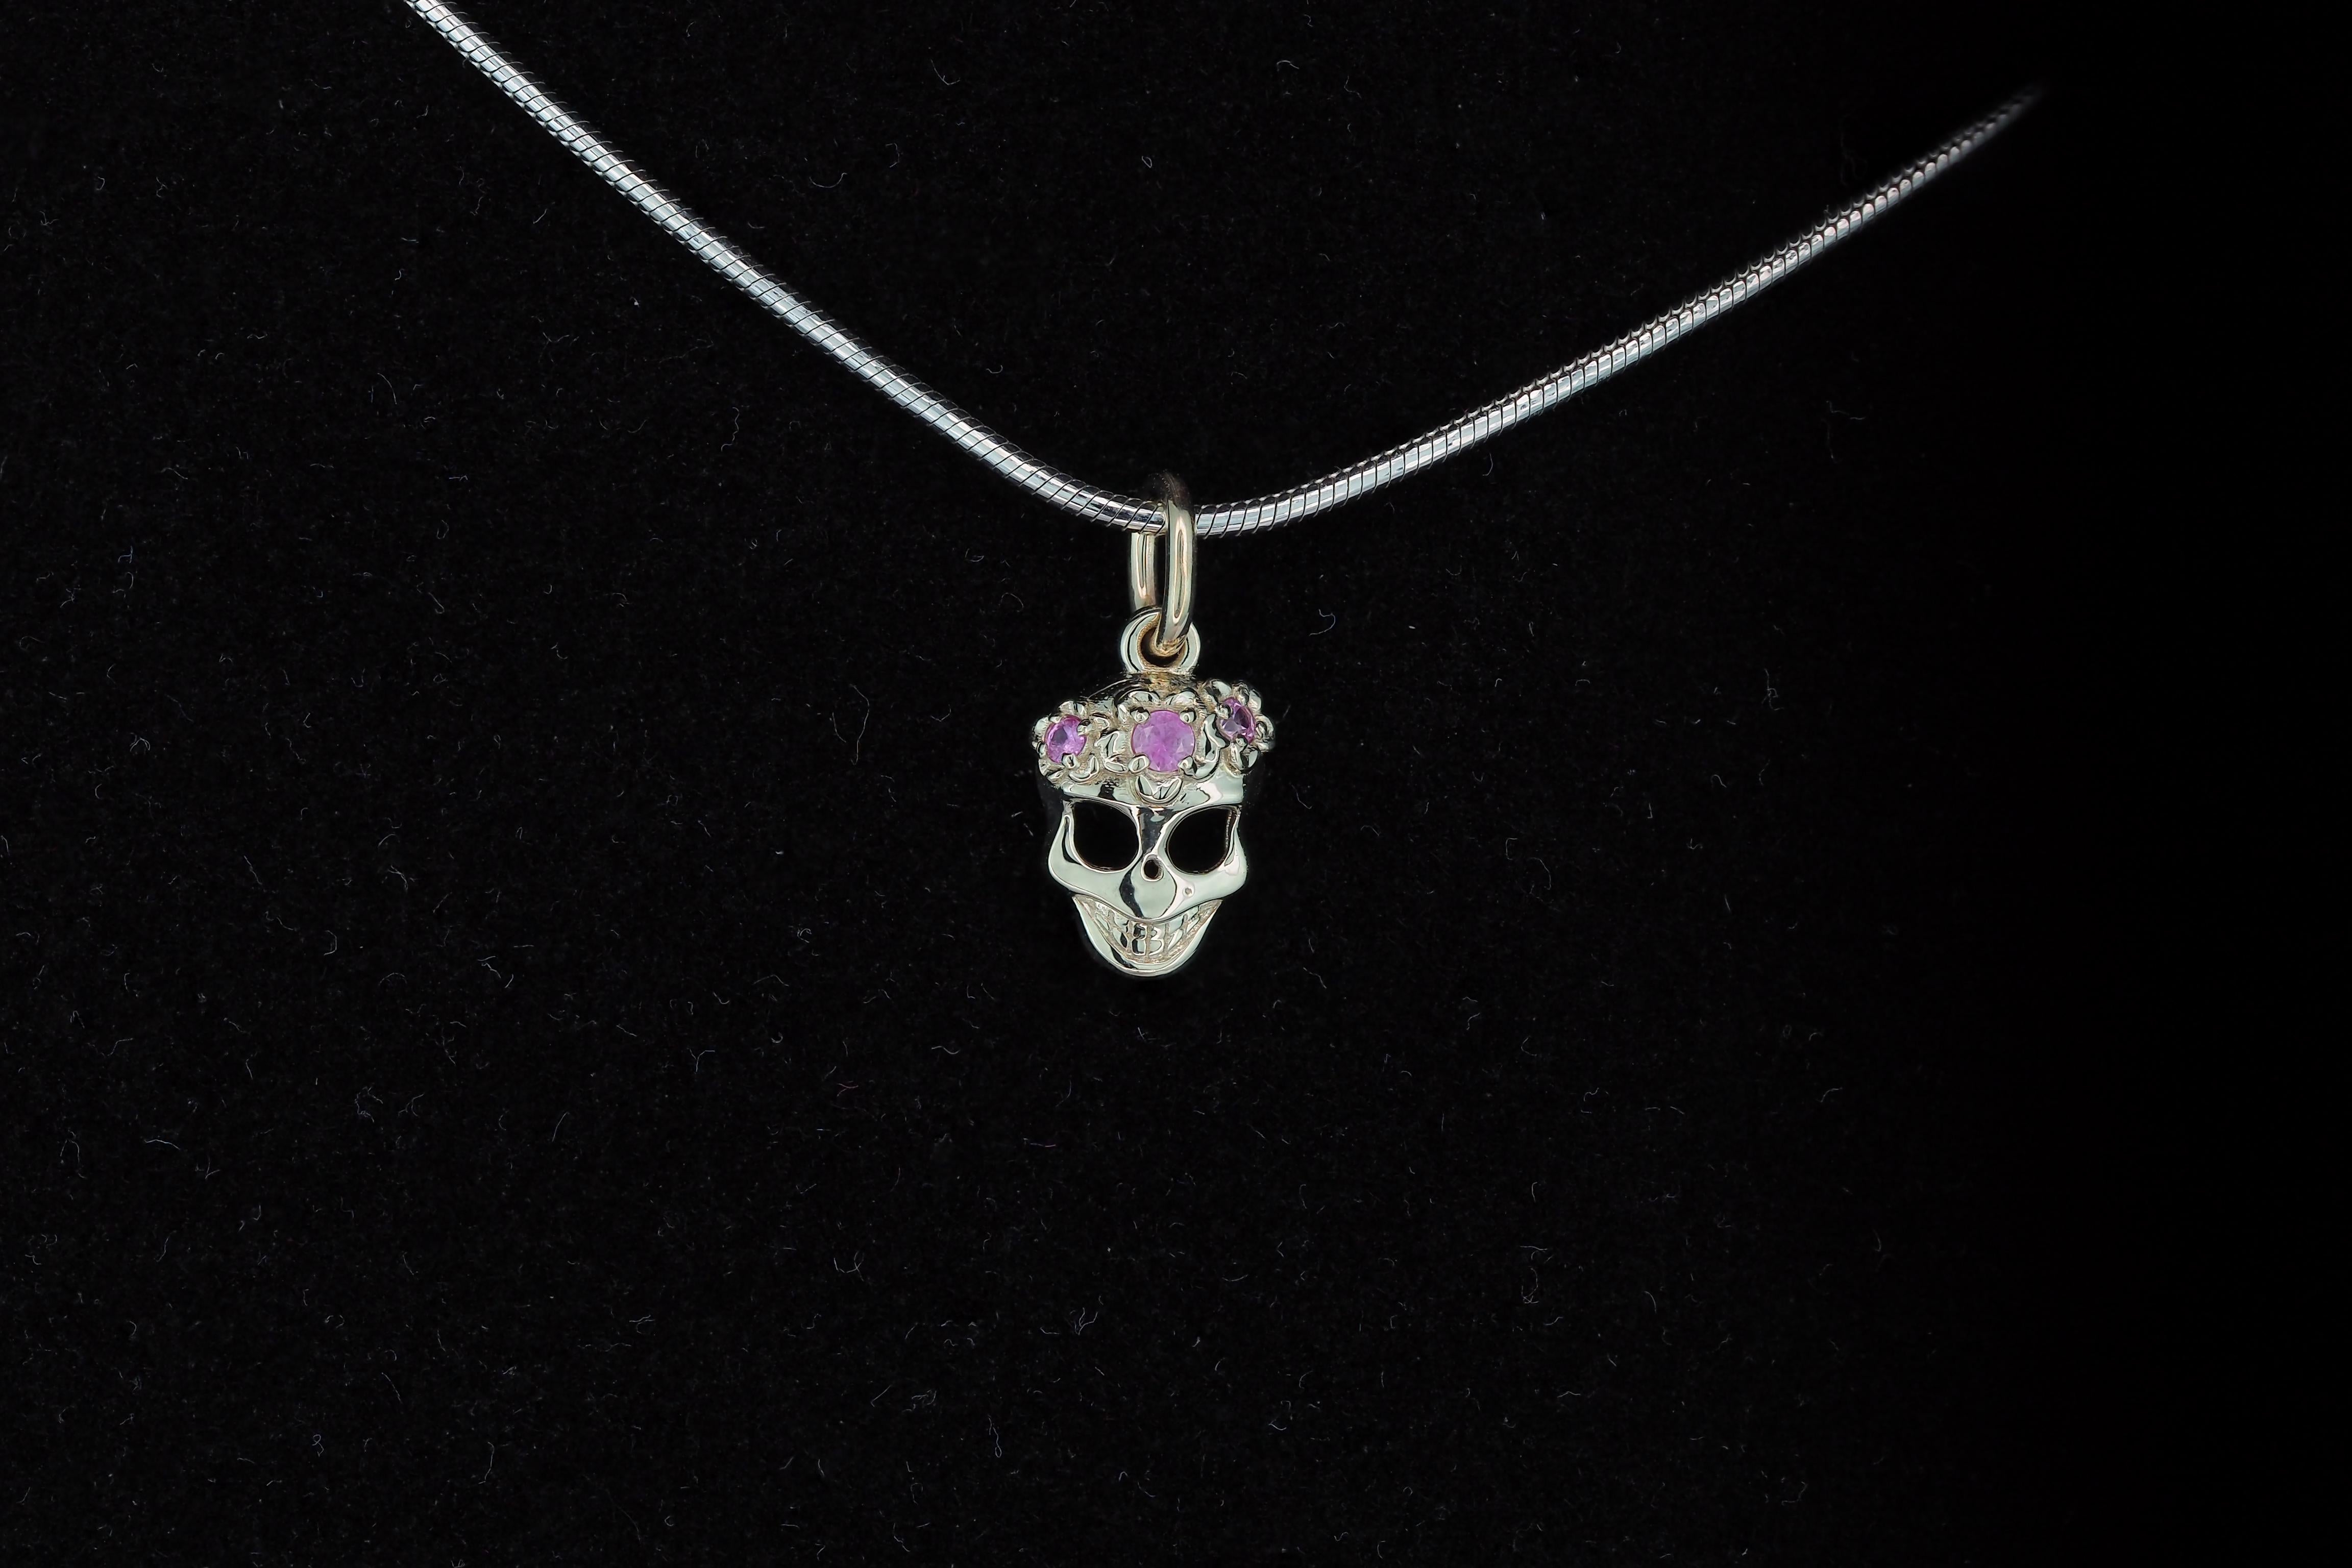 14k Gold Skull Pendant with Flowers with Sapphires For Sale 1